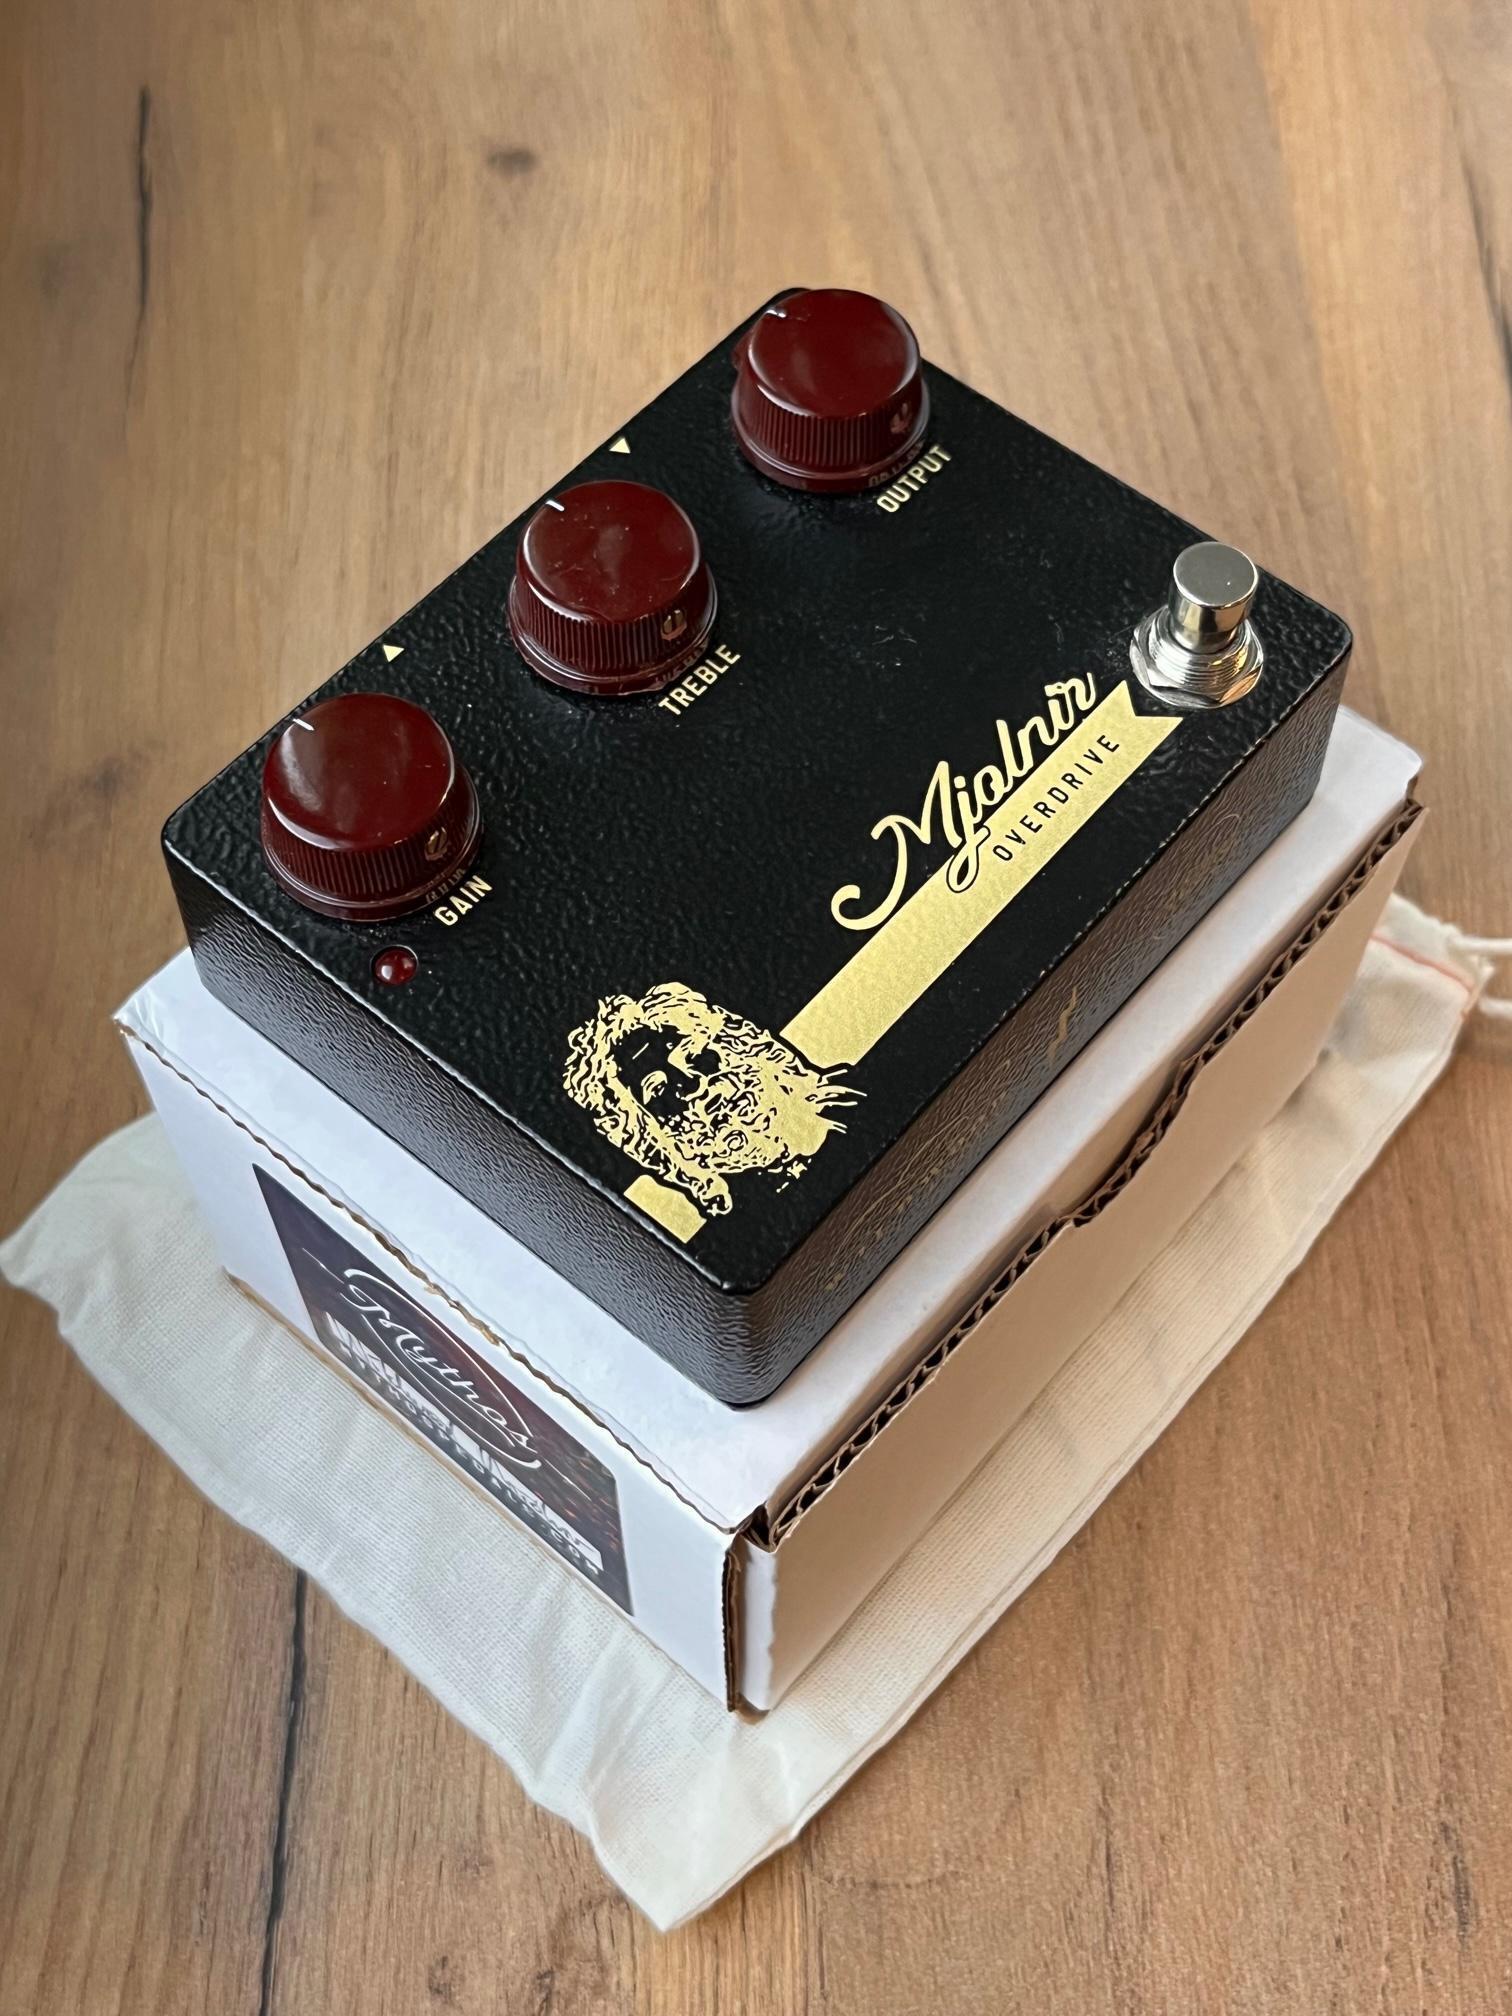 Used Mythos Pedals Wildwood Edition Mjolnir - Sweetwater's Gear